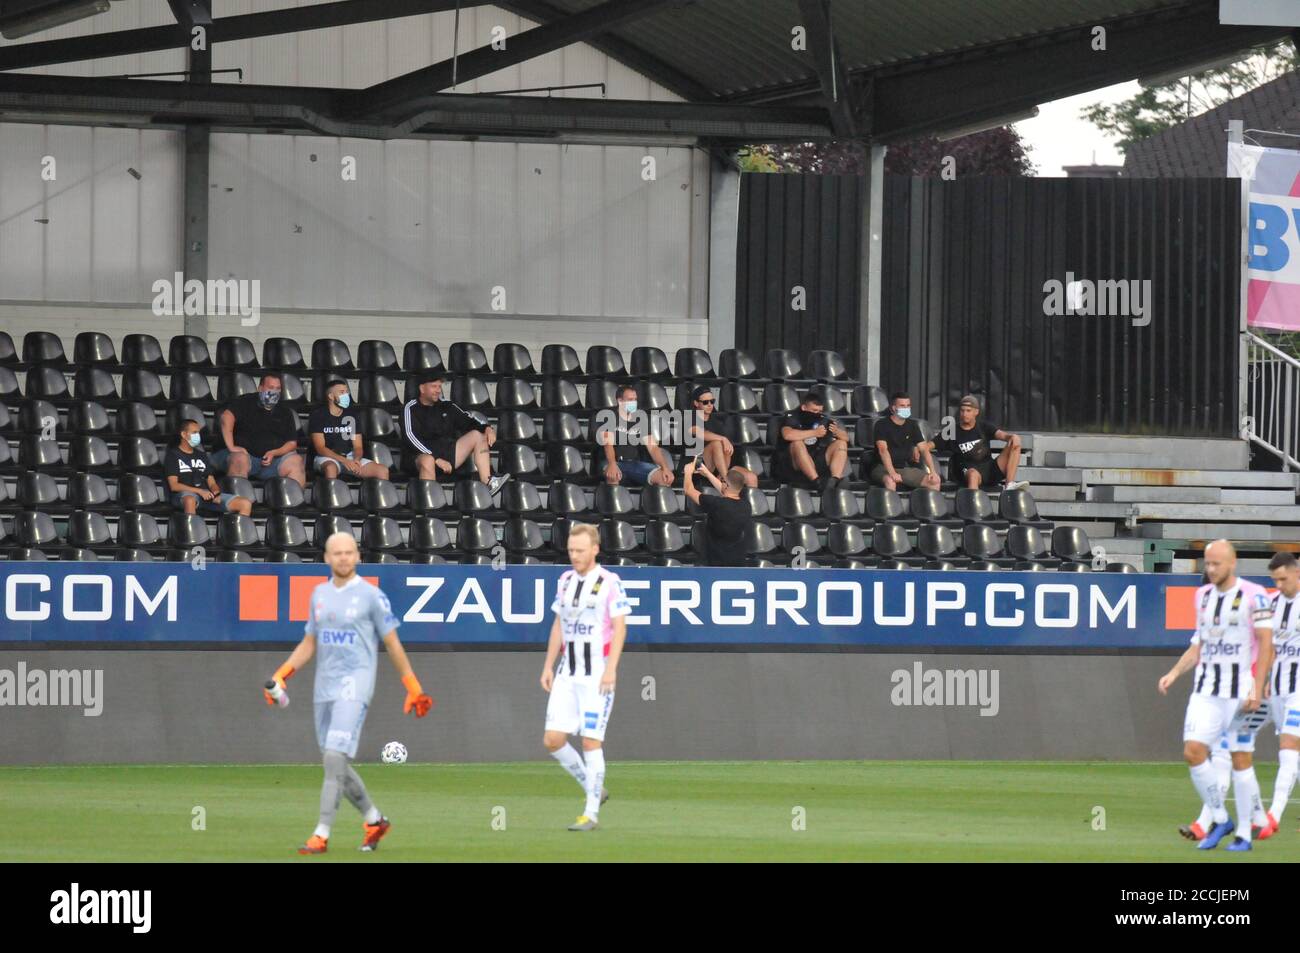 friendly match karlsruher sc and lask linz Stock Photo